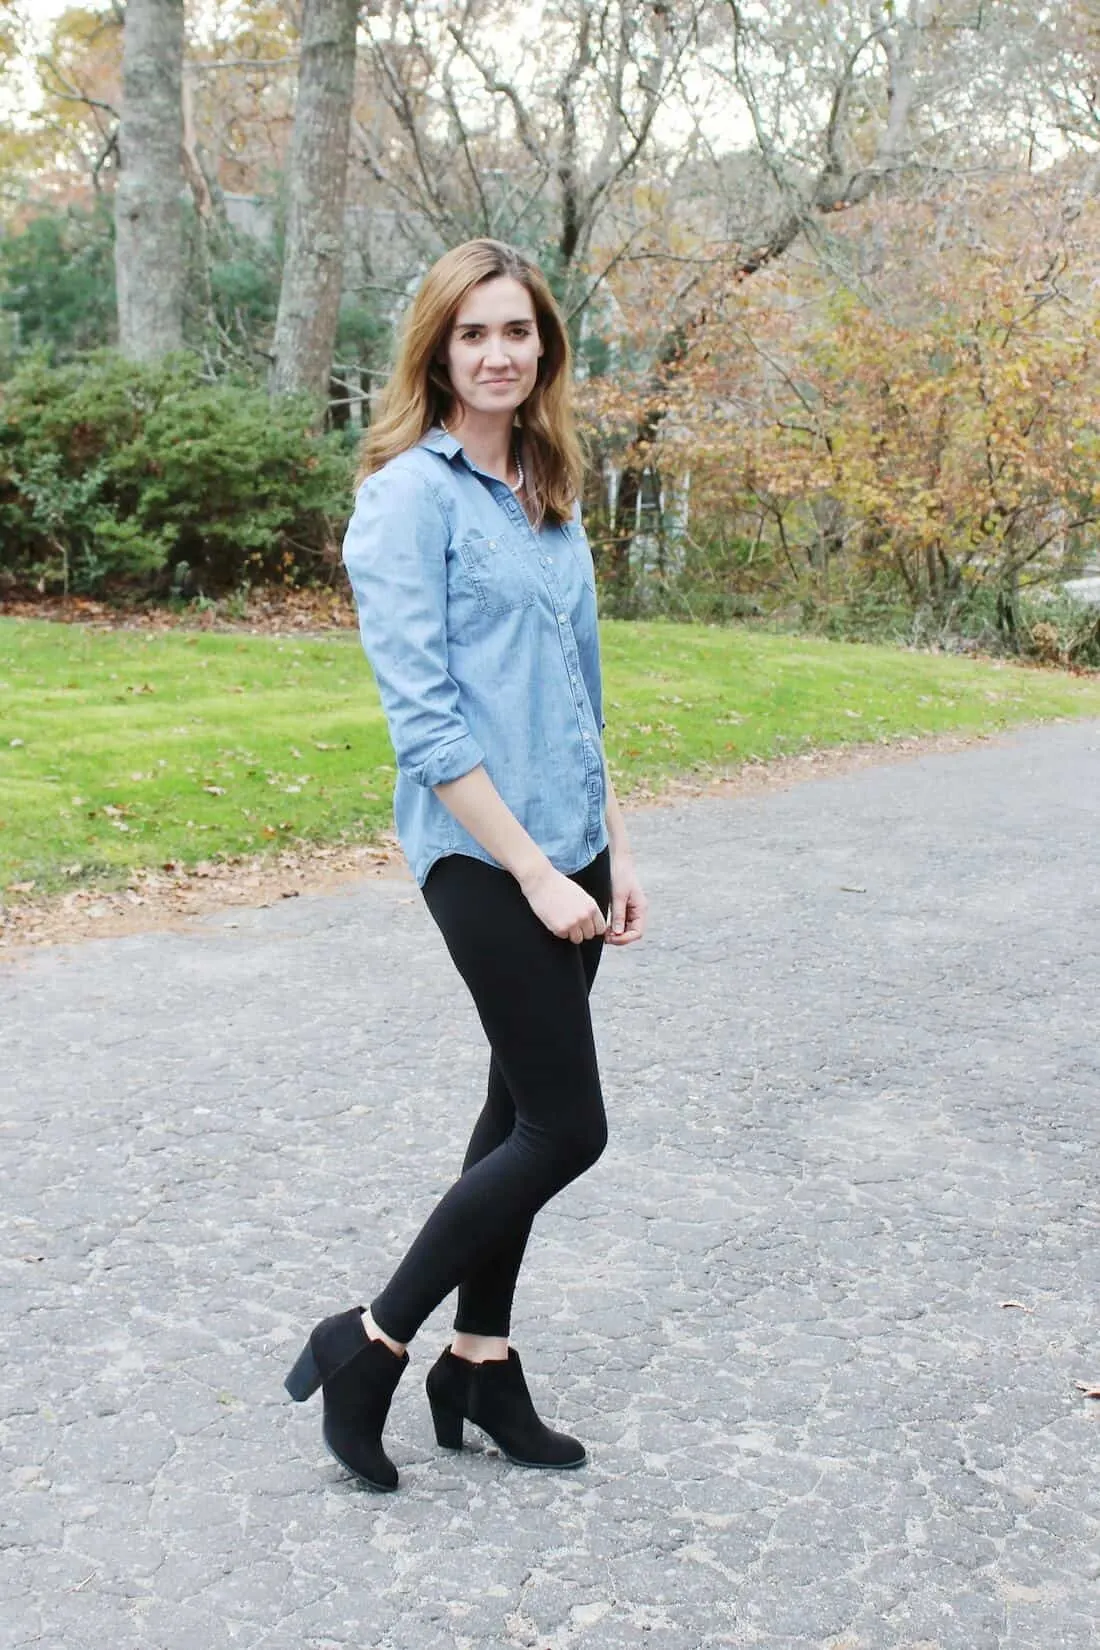 Maternity Fashion Idea: Leggings with Chambray Top for first trimester outfit